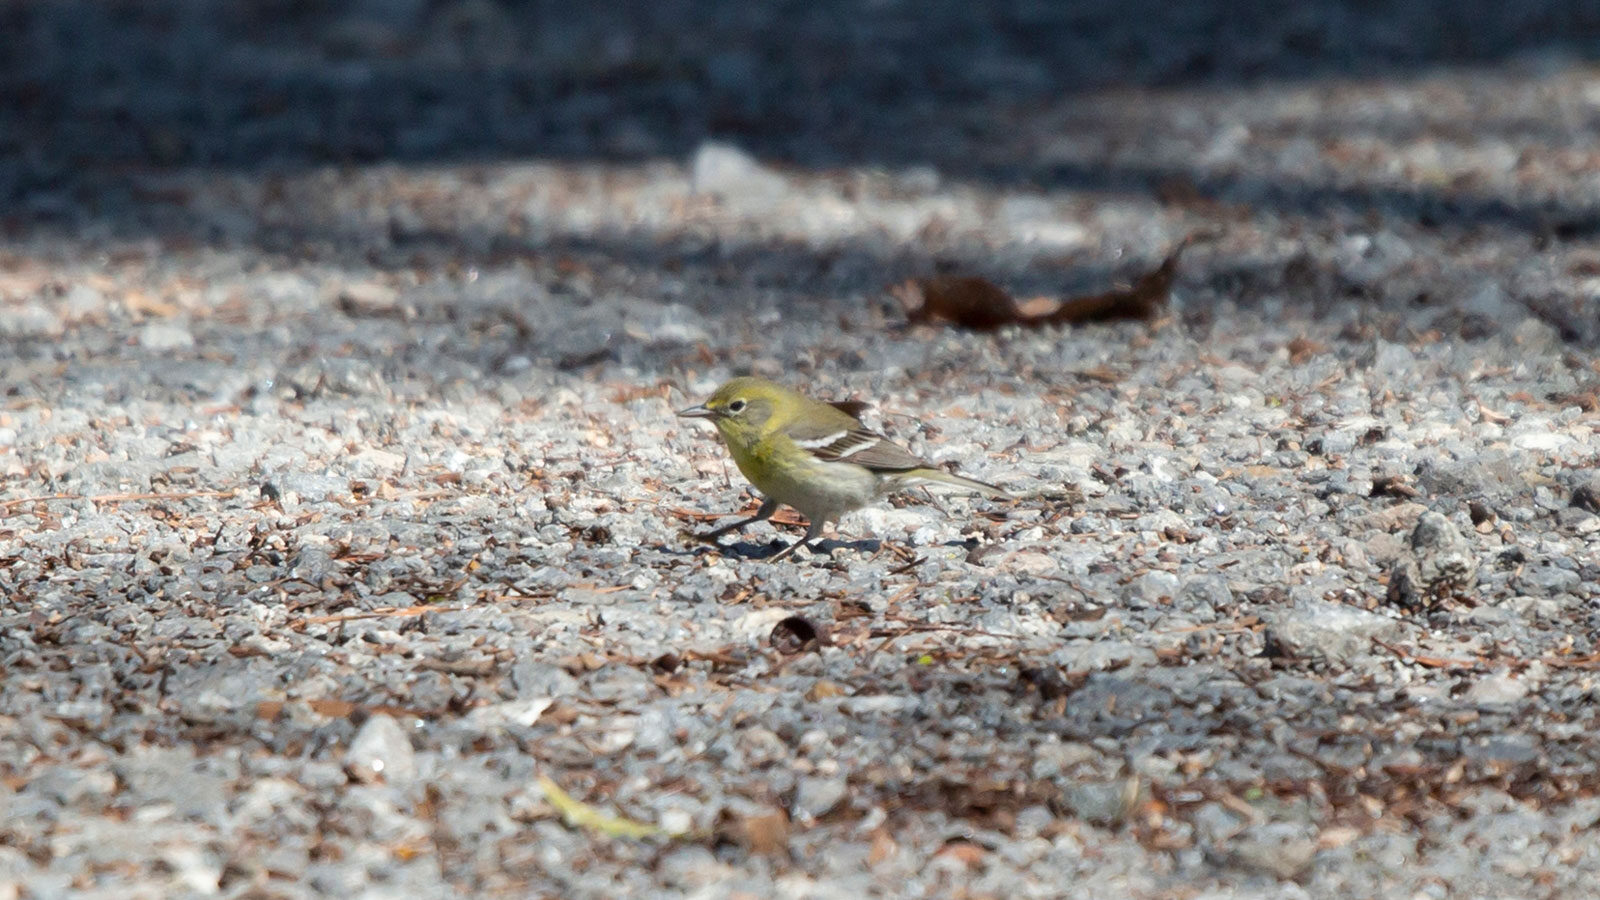 Pine warbler standing on a rocky path